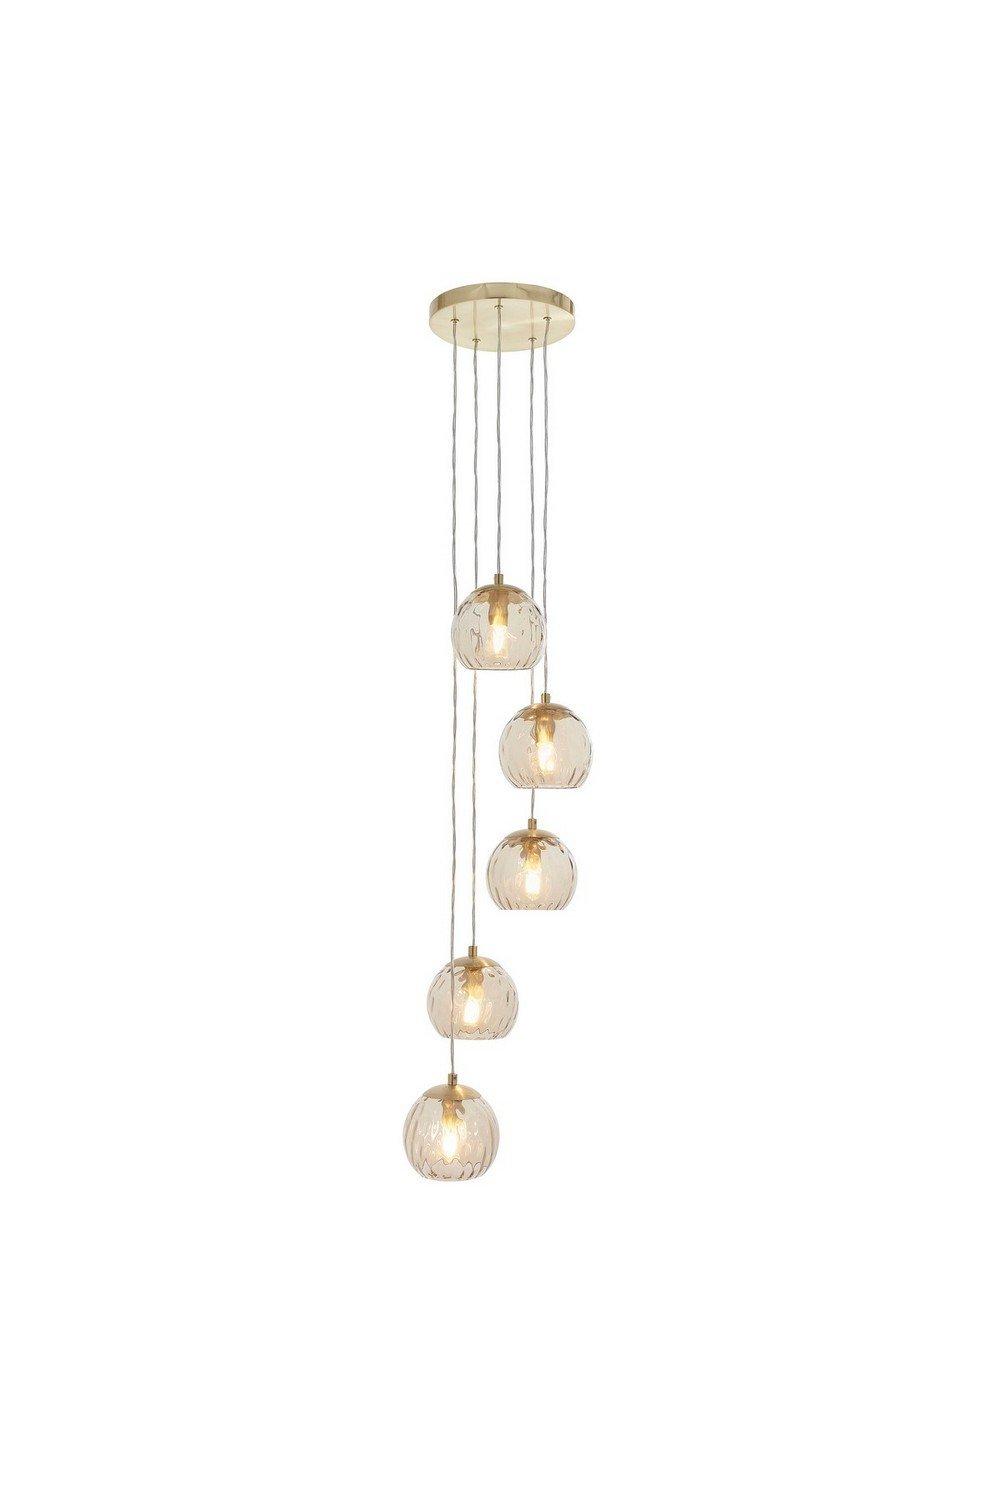 Dimple Modern Cluster 5 Light Pendant Brushed Brass Champagne Glass Shade